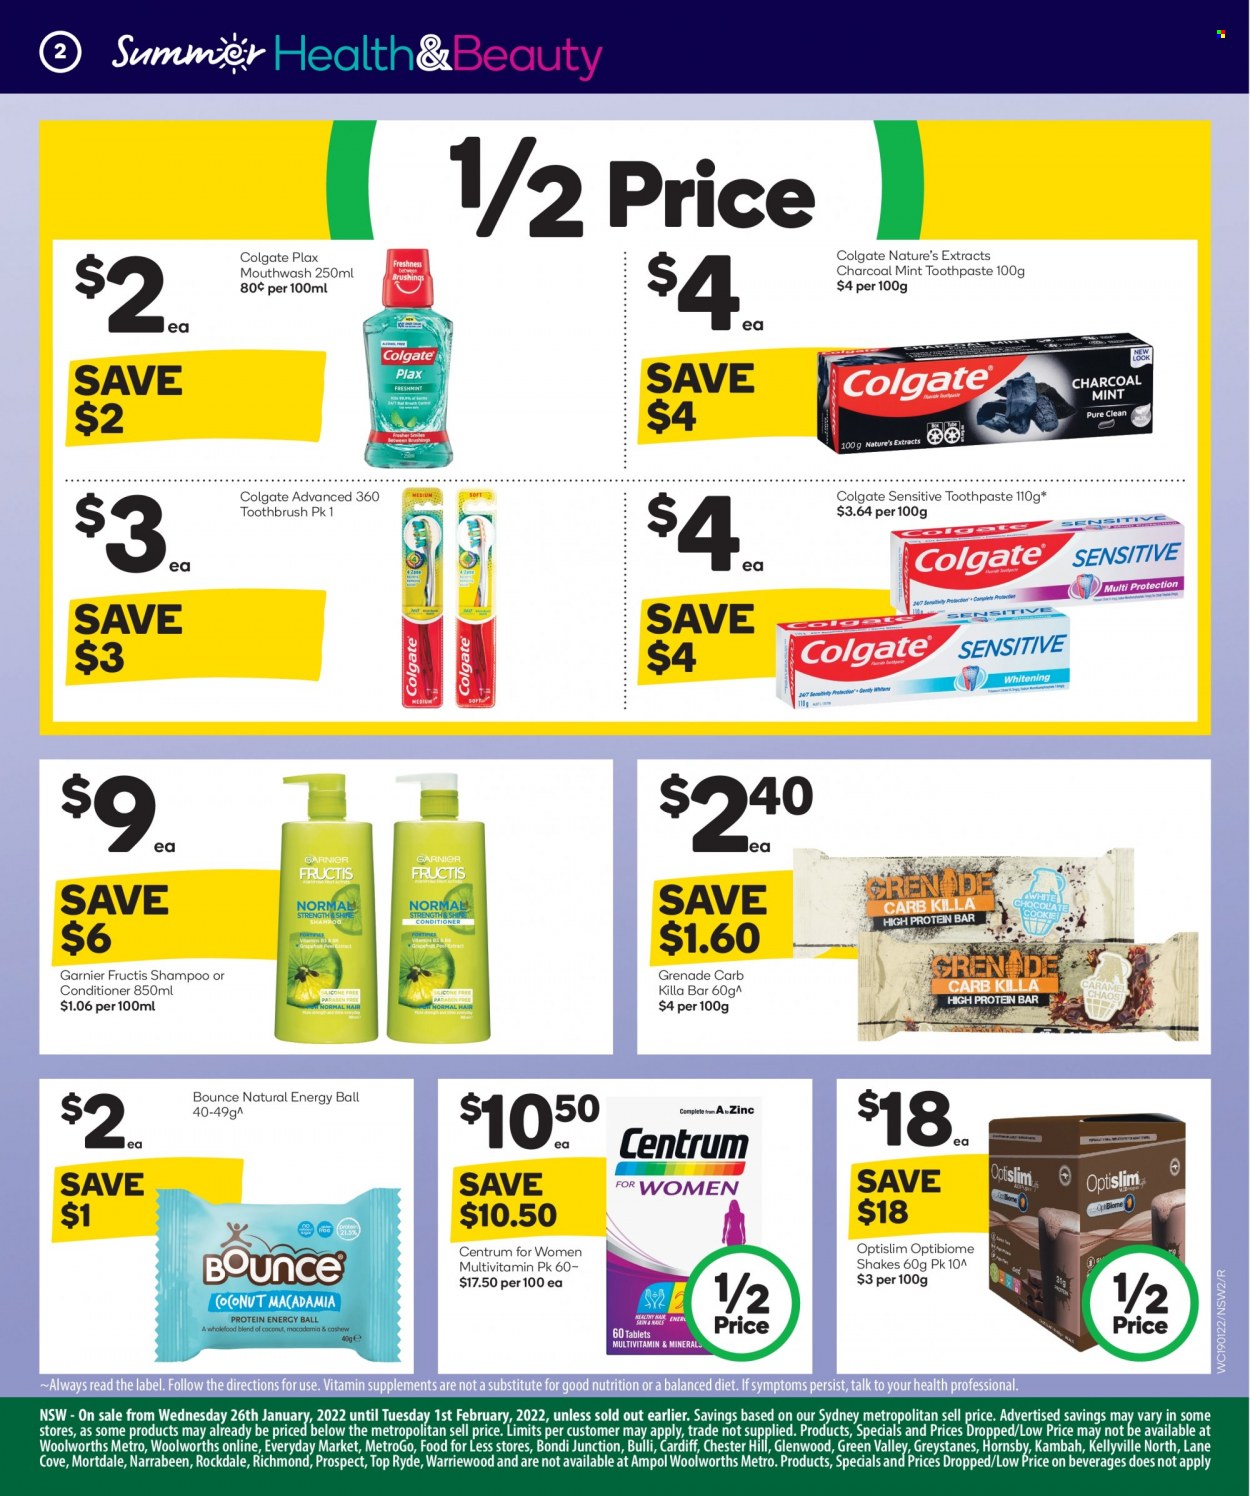 thumbnail - Woolworths Catalogue - 26 Jan 2022 - 1 Feb 2022 - Sales products - shake, macadamia nuts, Bounce, shampoo, Colgate, toothbrush, toothpaste, mouthwash, Plax, Garnier, conditioner, Fructis, multivitamin, zinc, Centrum, Optislim. Page 3.